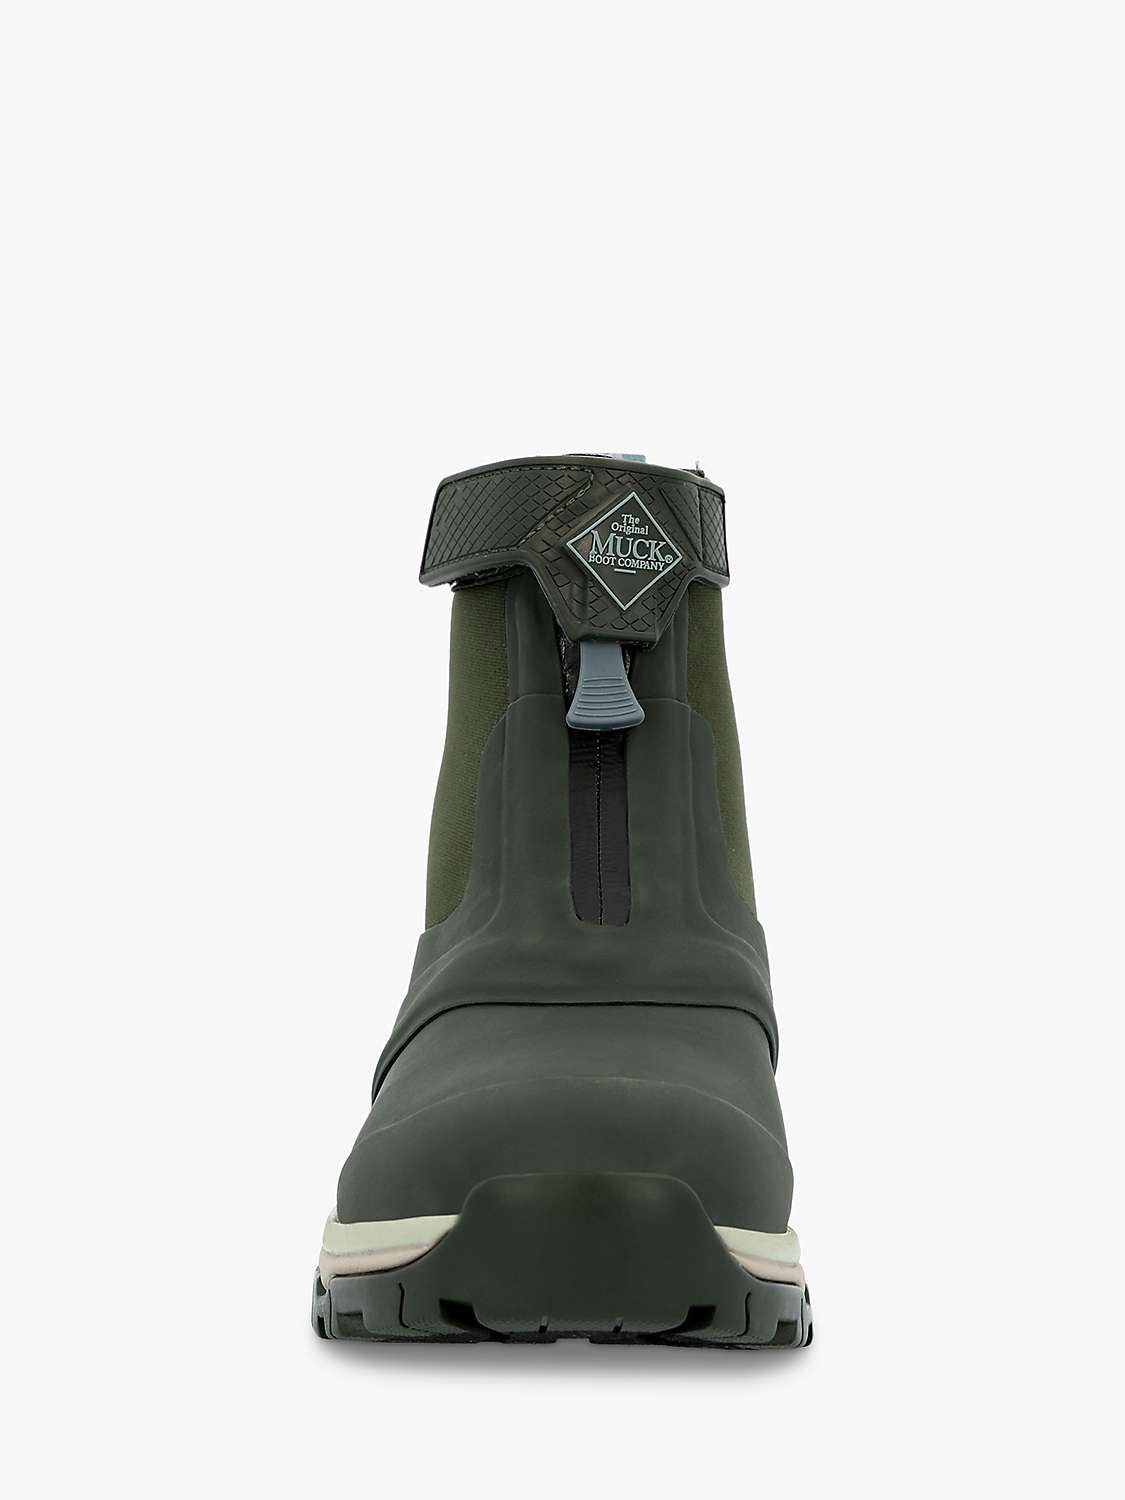 Buy Muck Apex Zip Up Wellington Ankle Boots, Moss Online at johnlewis.com